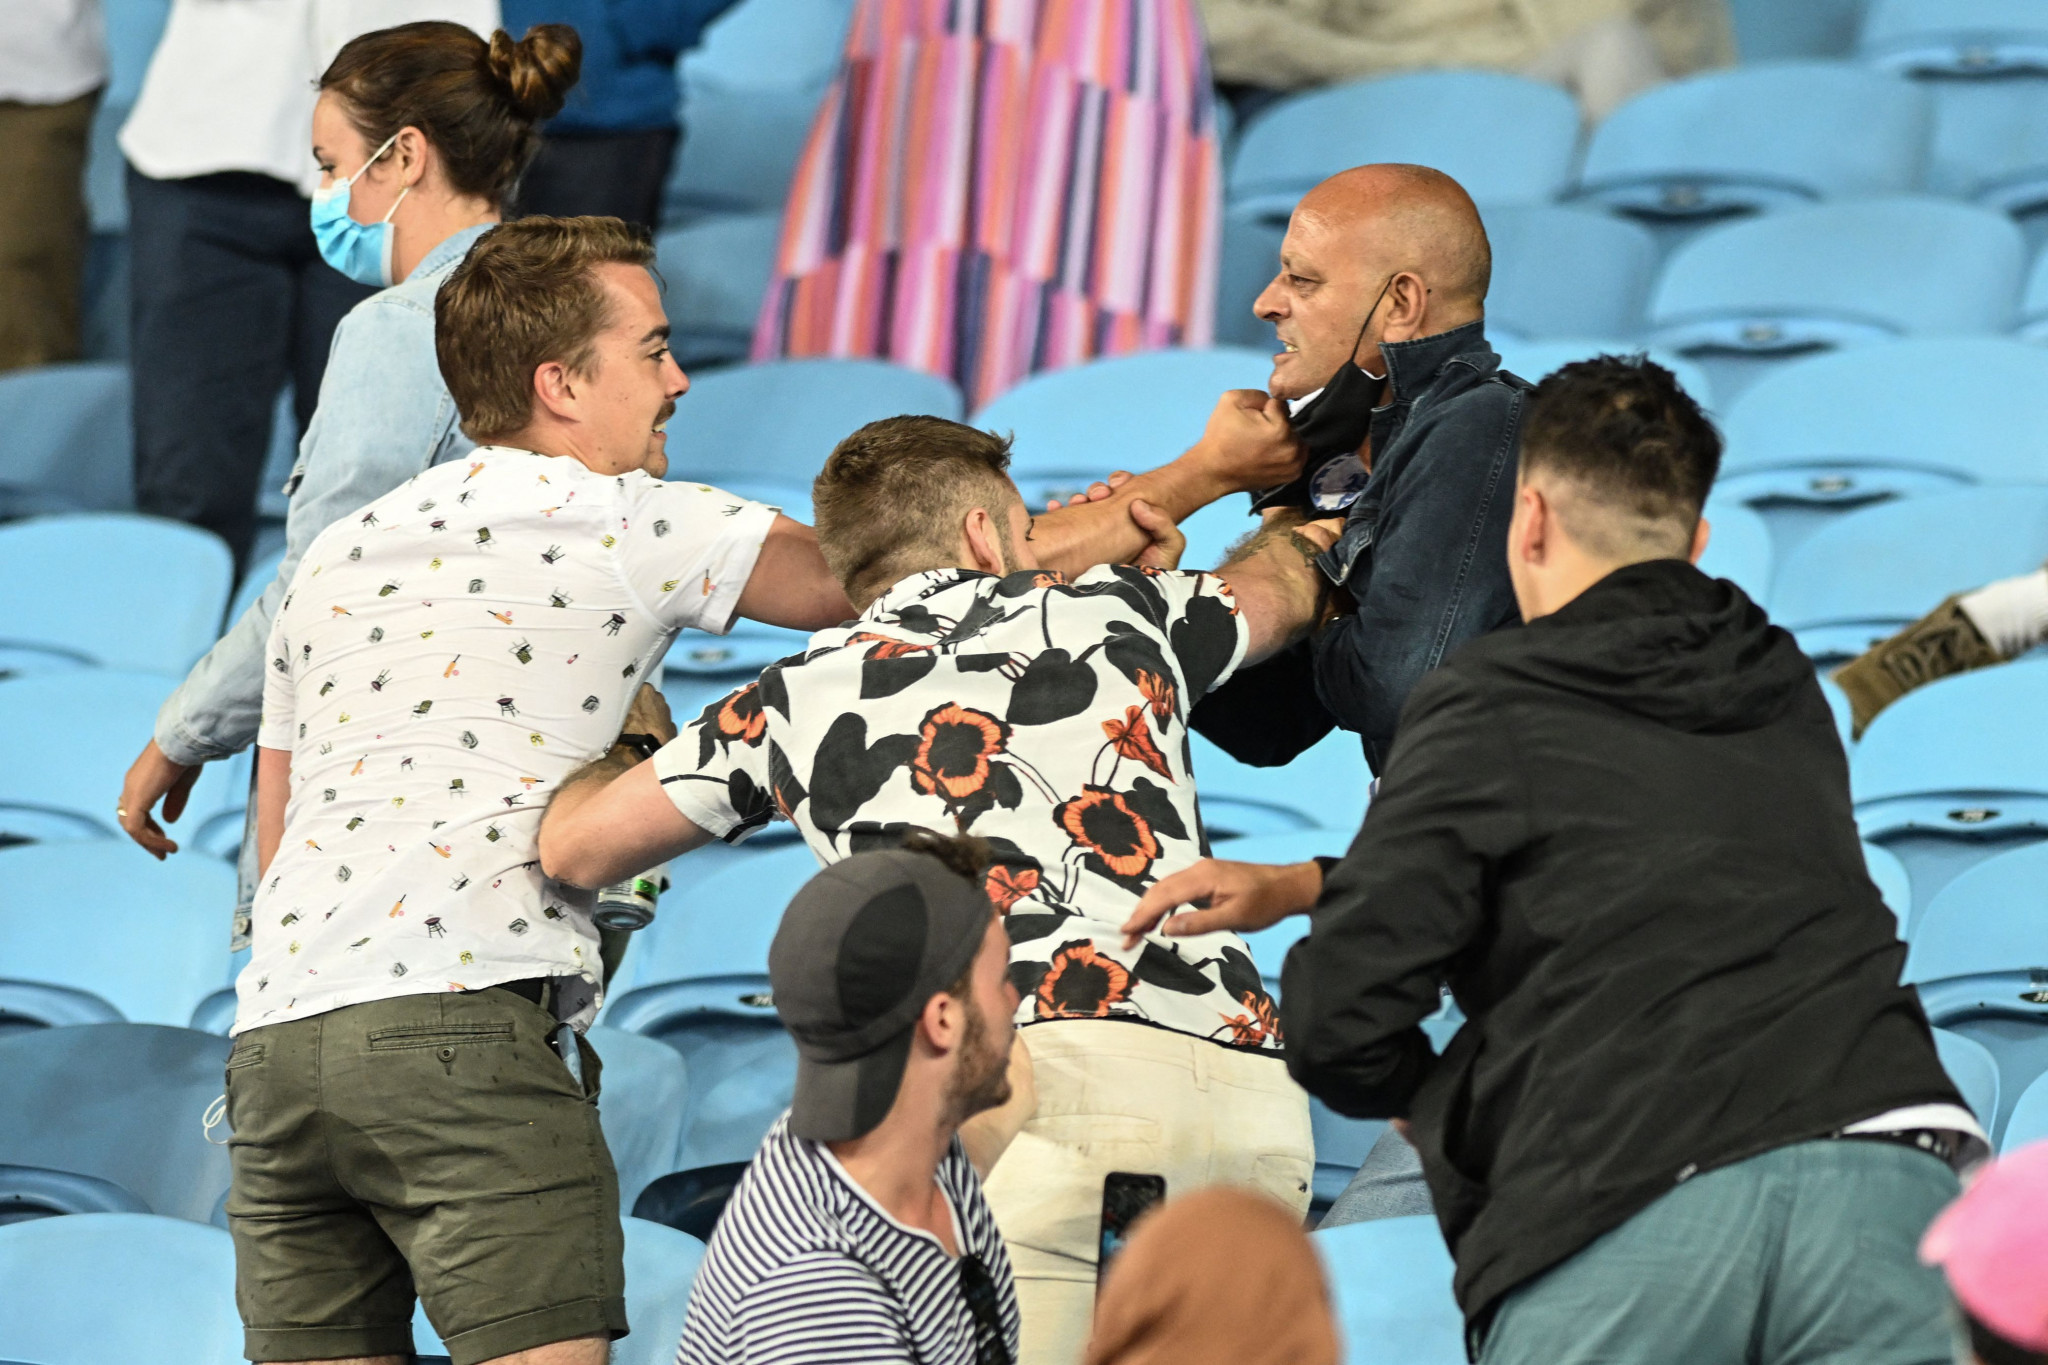 Anti-mask spectator ejected from Australian Open as fight ensues in another match